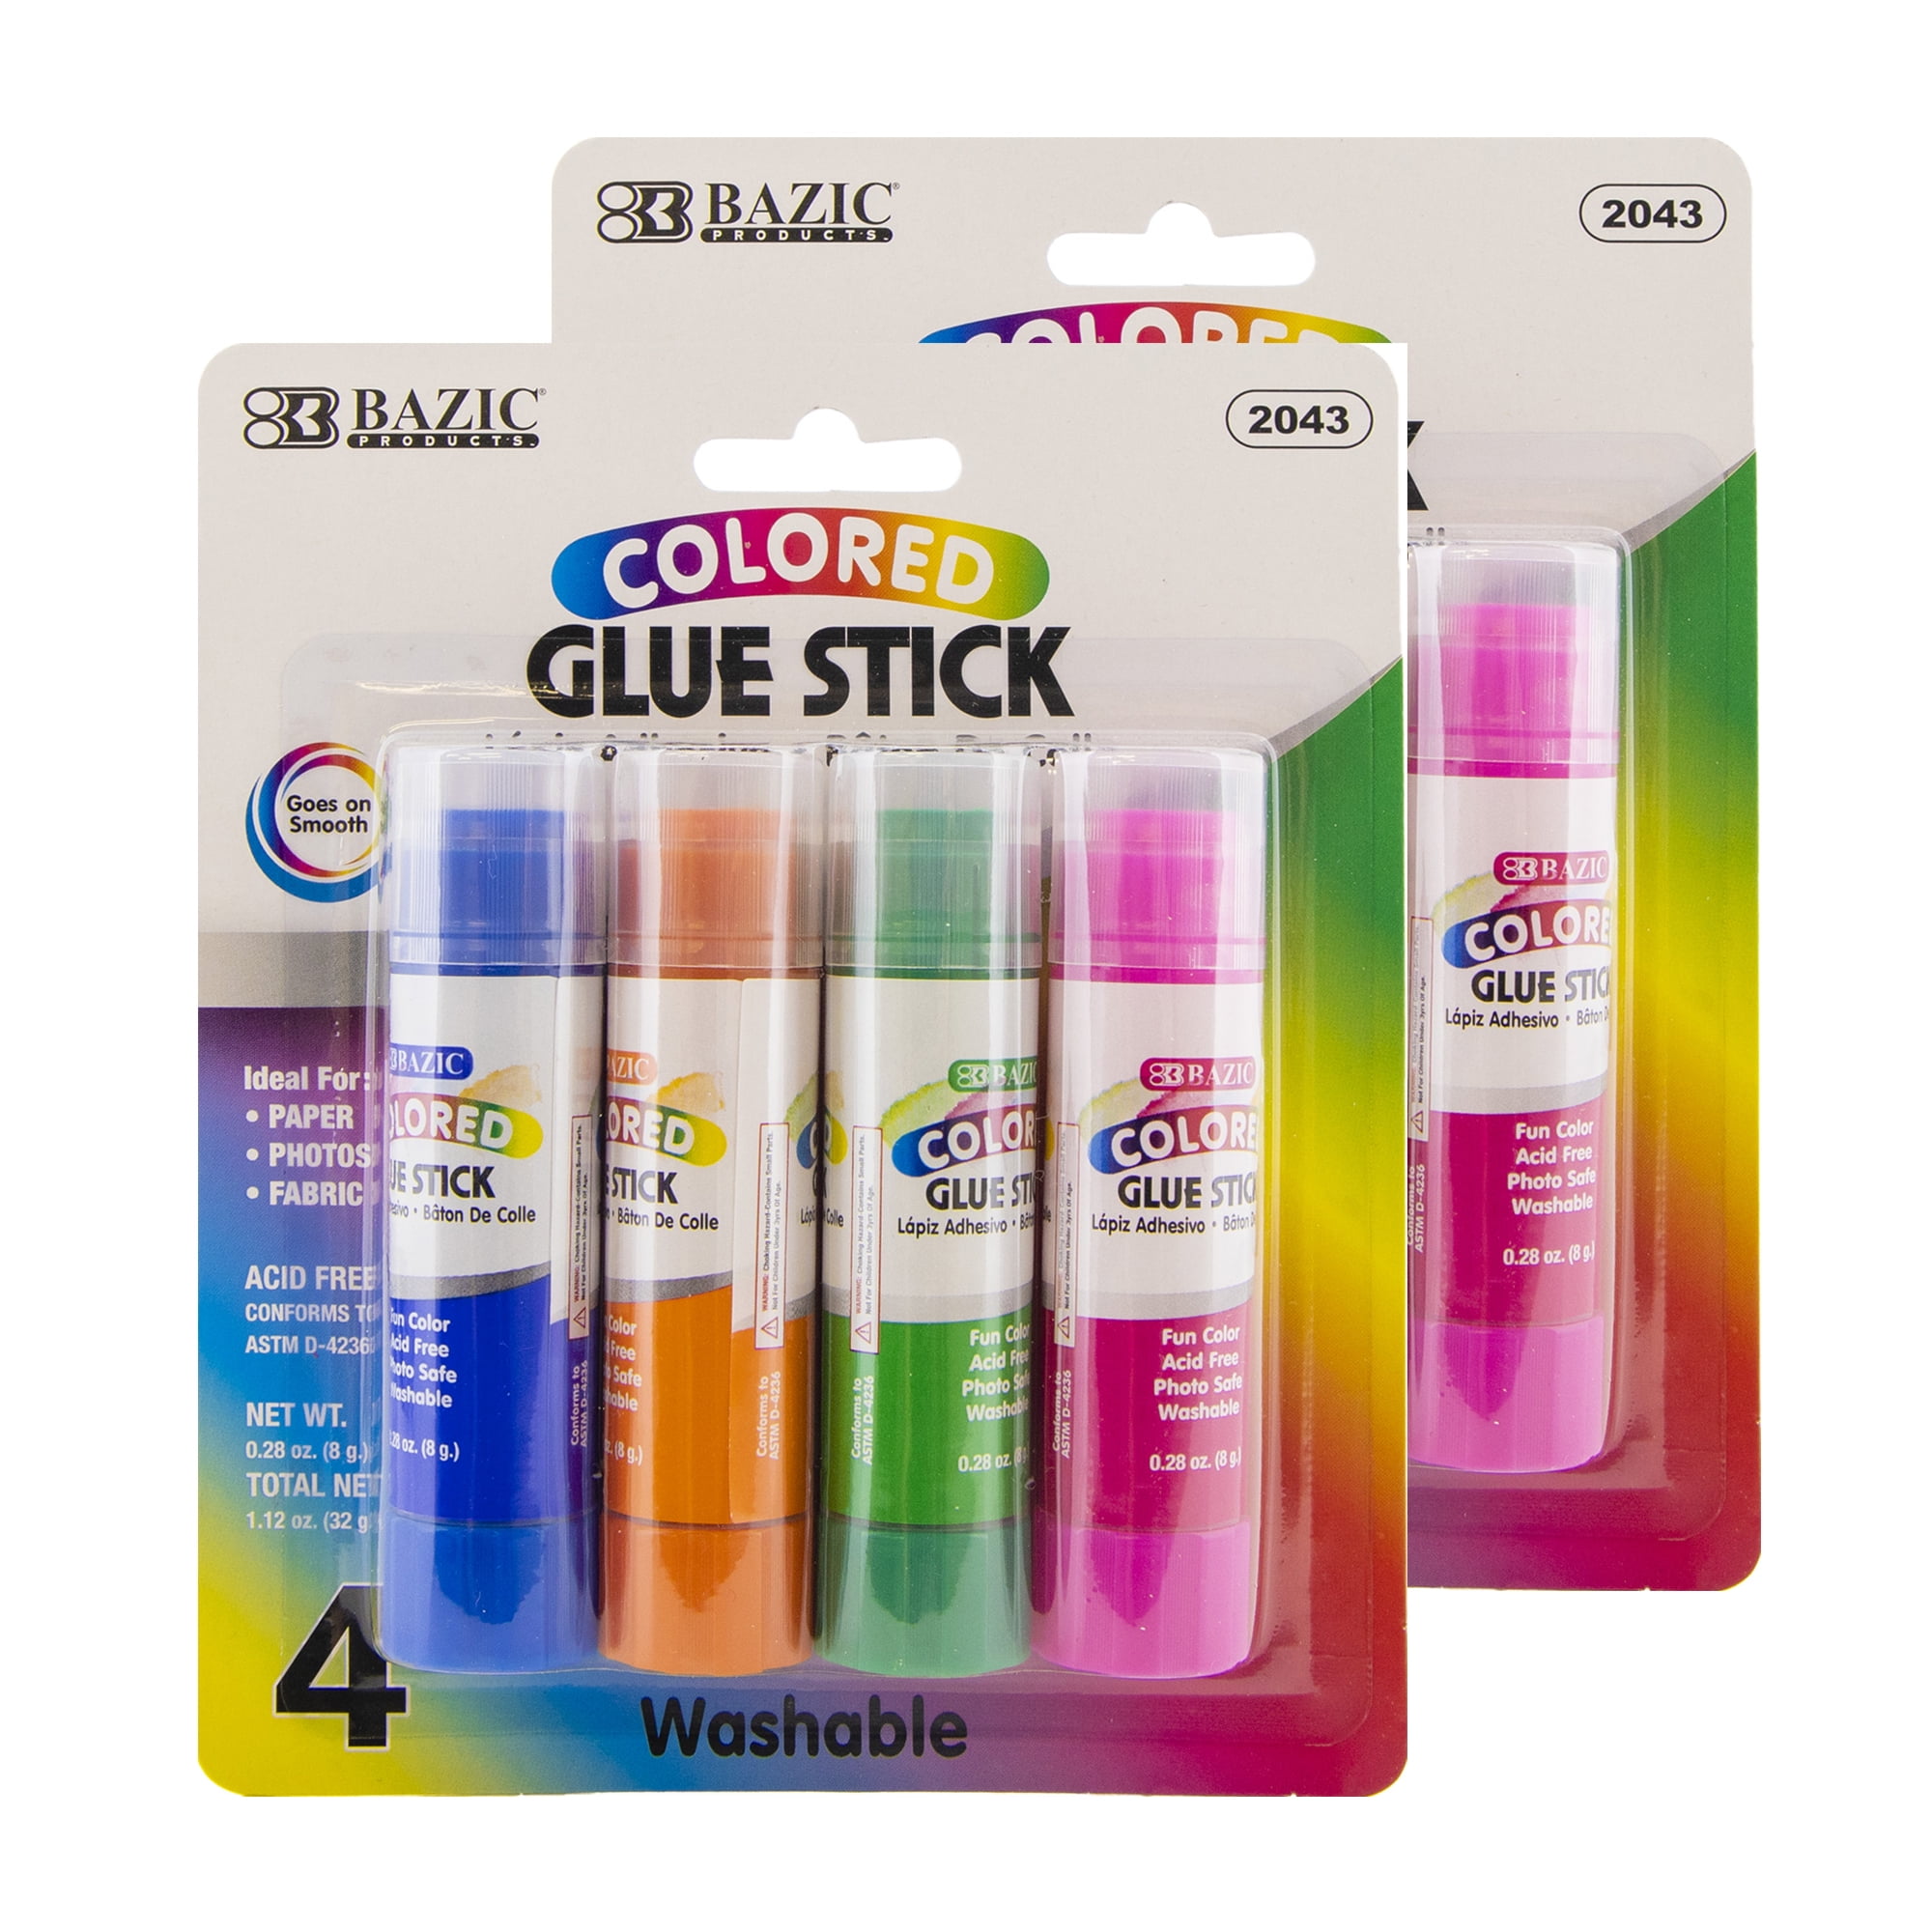 BAZIC Washable Colored Glue Stick 8g/0.28 Oz, All Purpose Acid Glue Sticks  for Kids Photos Paper Kids at School Home Office (4/Pack), 1-Pack - Yahoo  Shopping